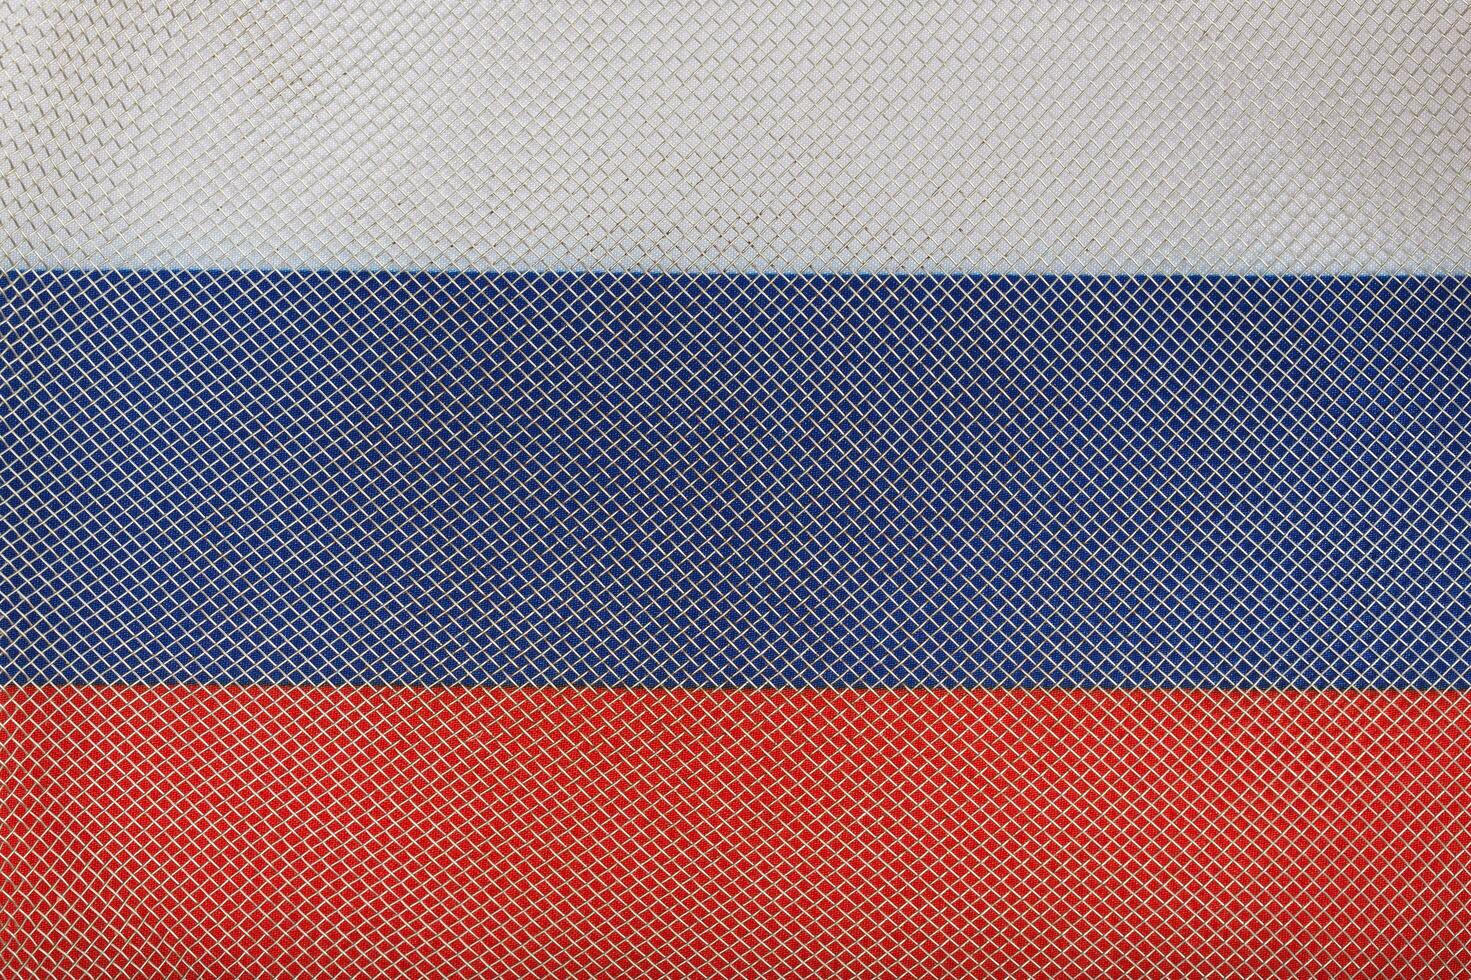 Metallic net on a flag of Russia. Background photo